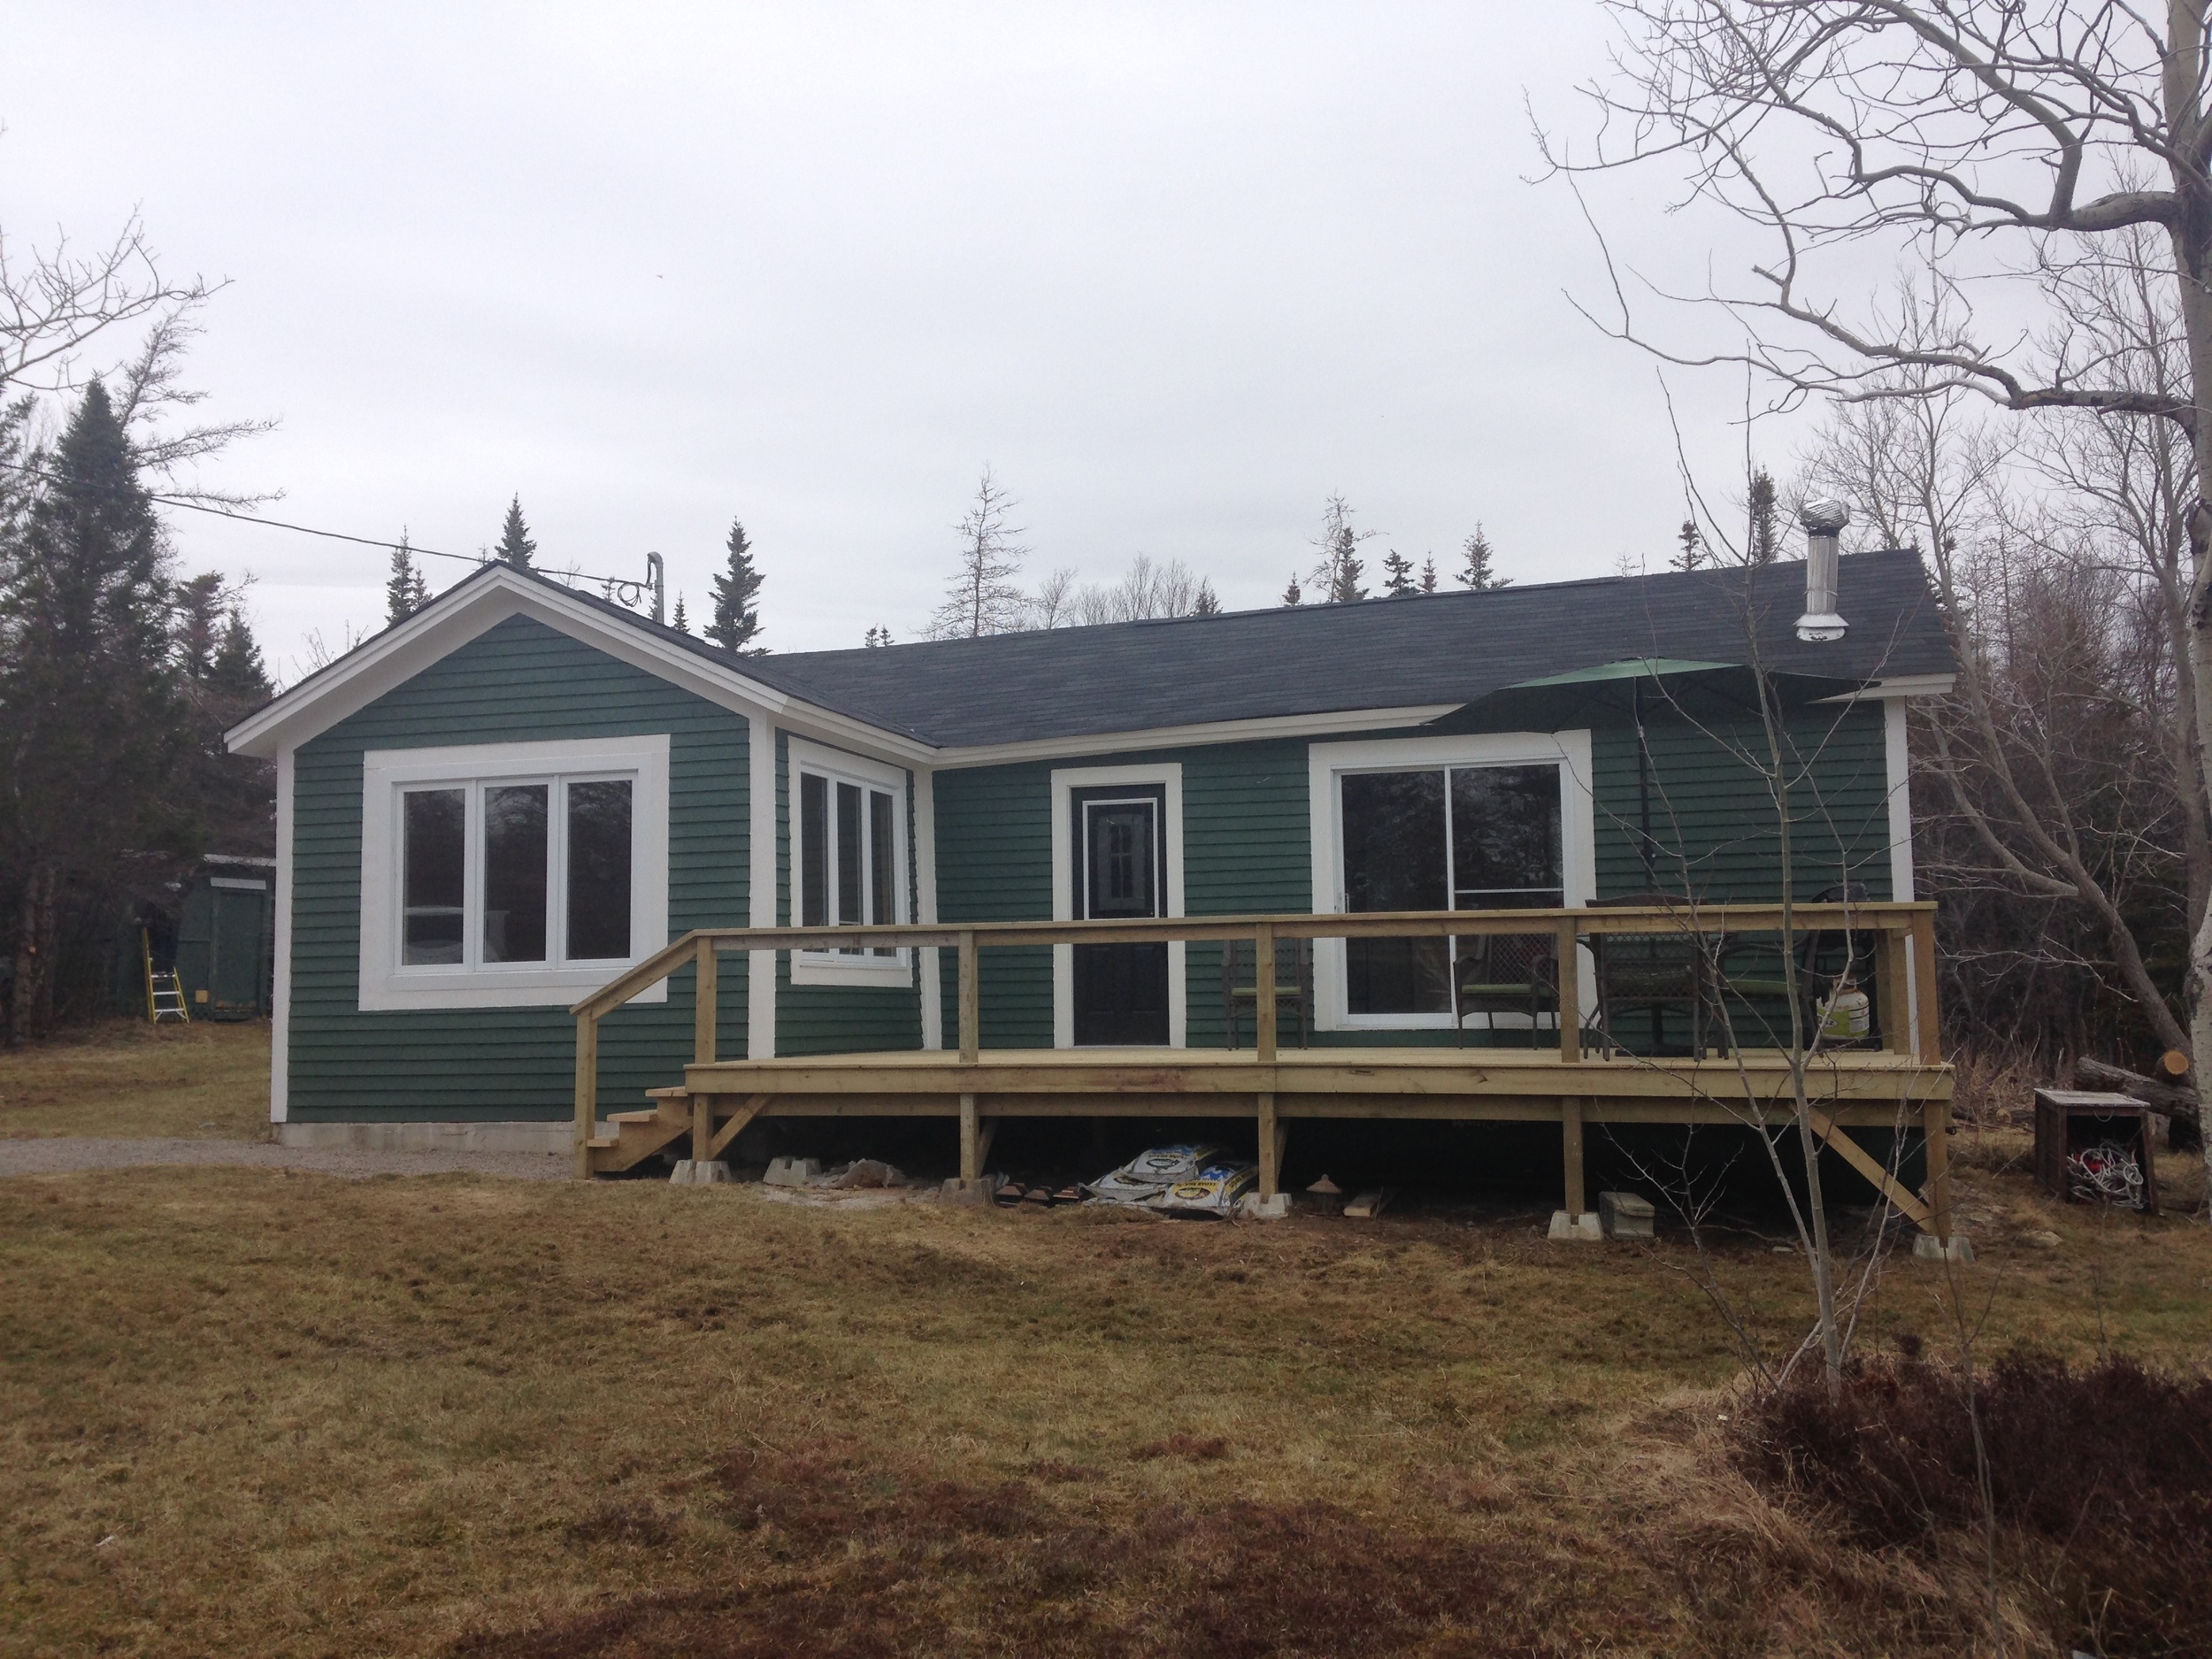 Wood siding and trims, new deck and shingles